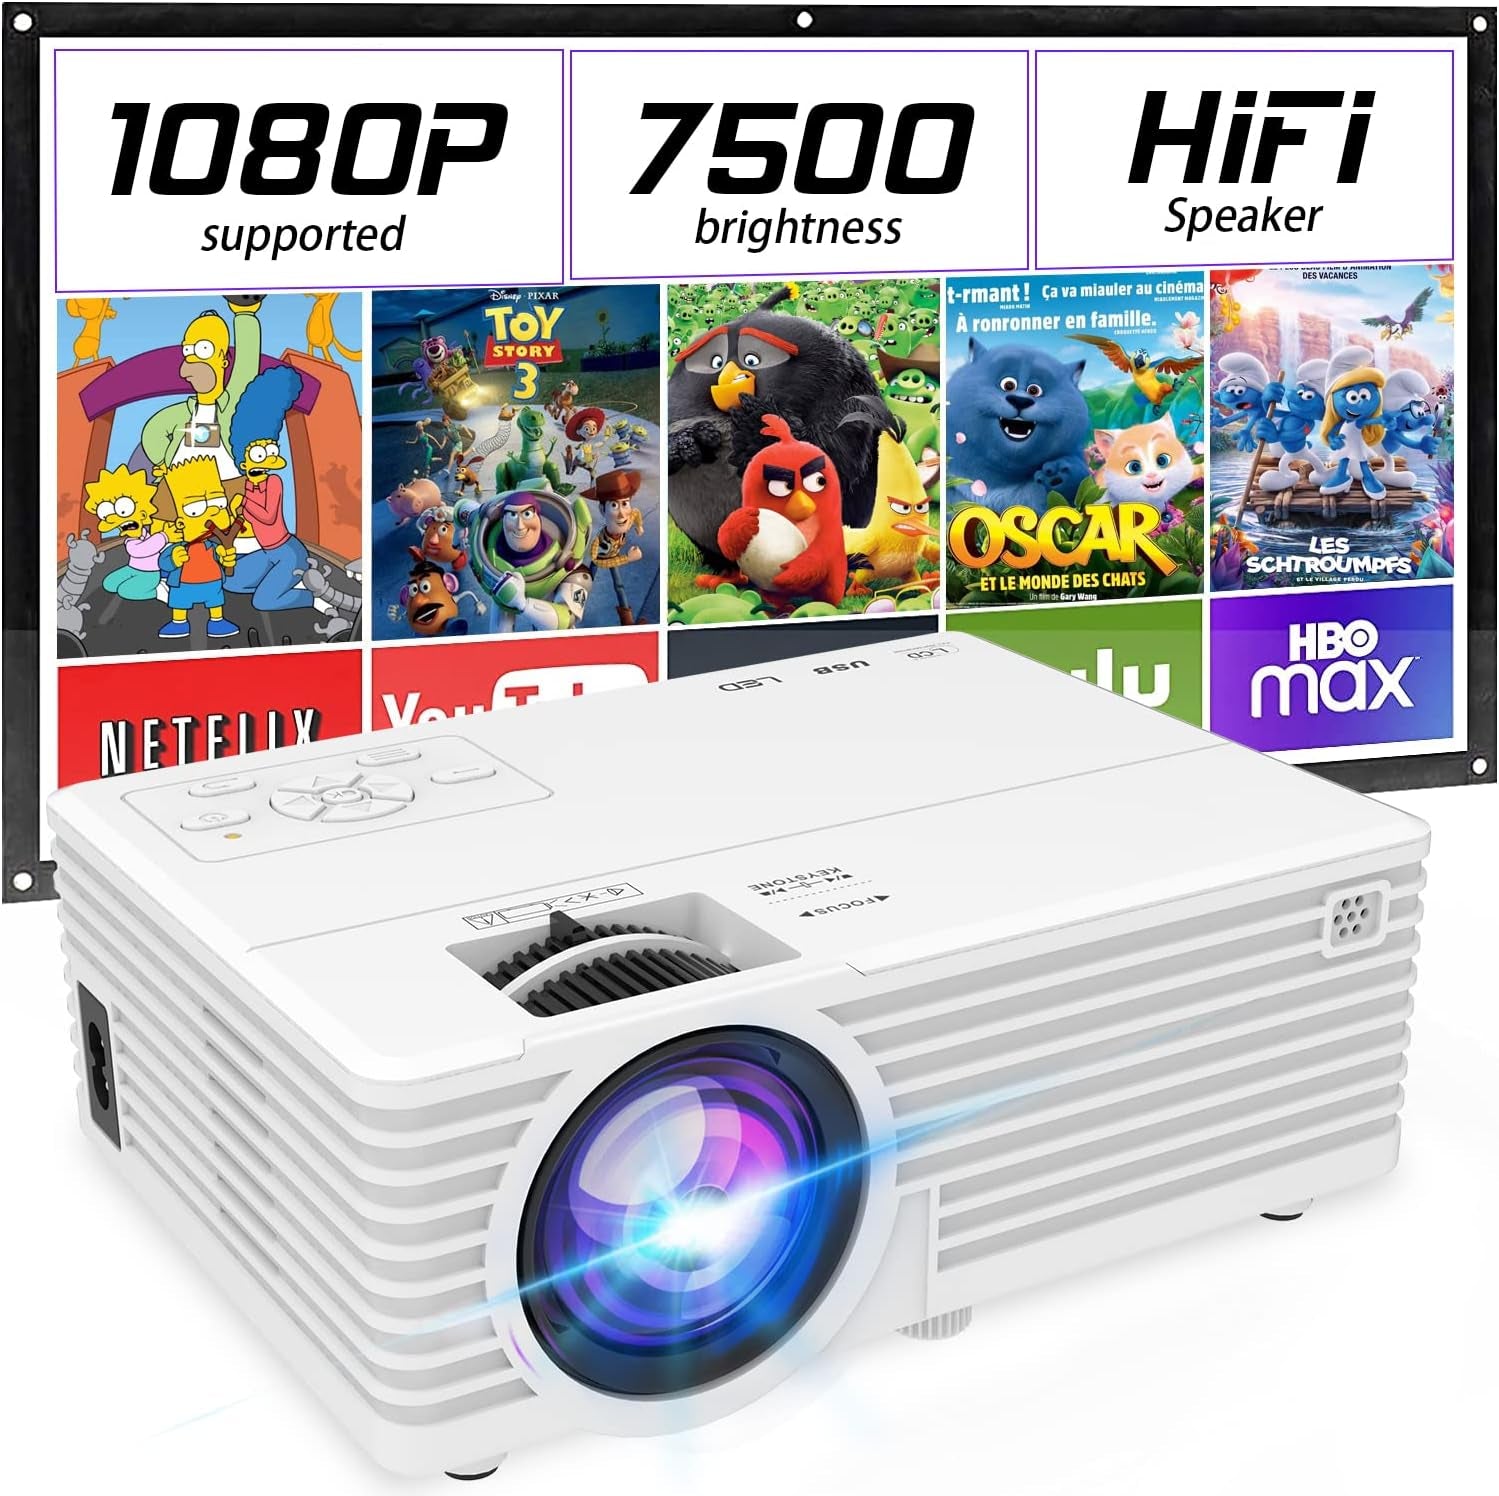 Mini Video Projector, 1080P Supported, Portable Outdoor Movie Projector, 176" Display Compatible with TV Stick, HDMI, USB, VGA, AV for Home Entertainment